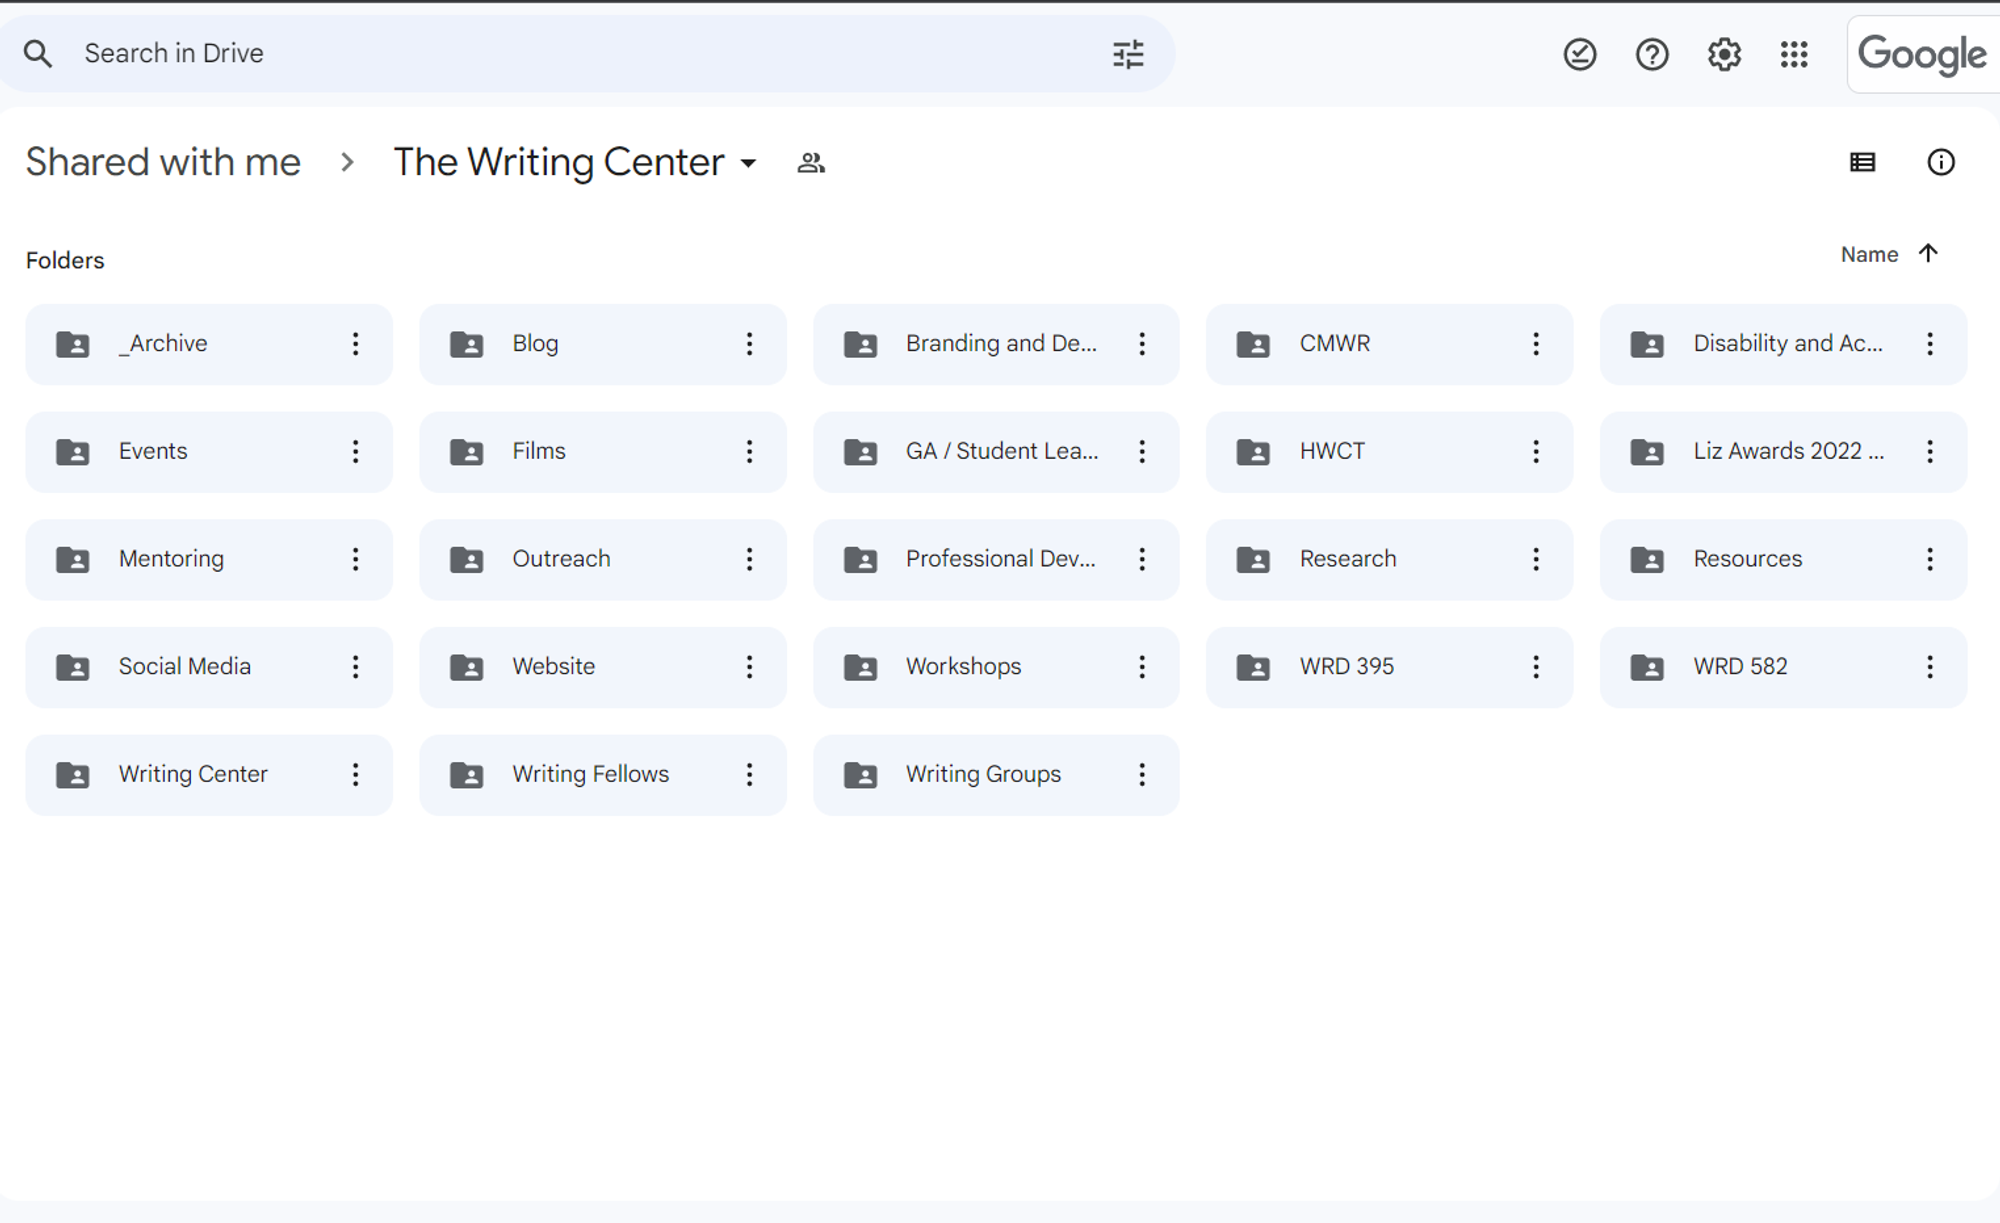 All of the work produced for each of the Writing Center's initiatives is stored in the Writing Center's Shared Drive.